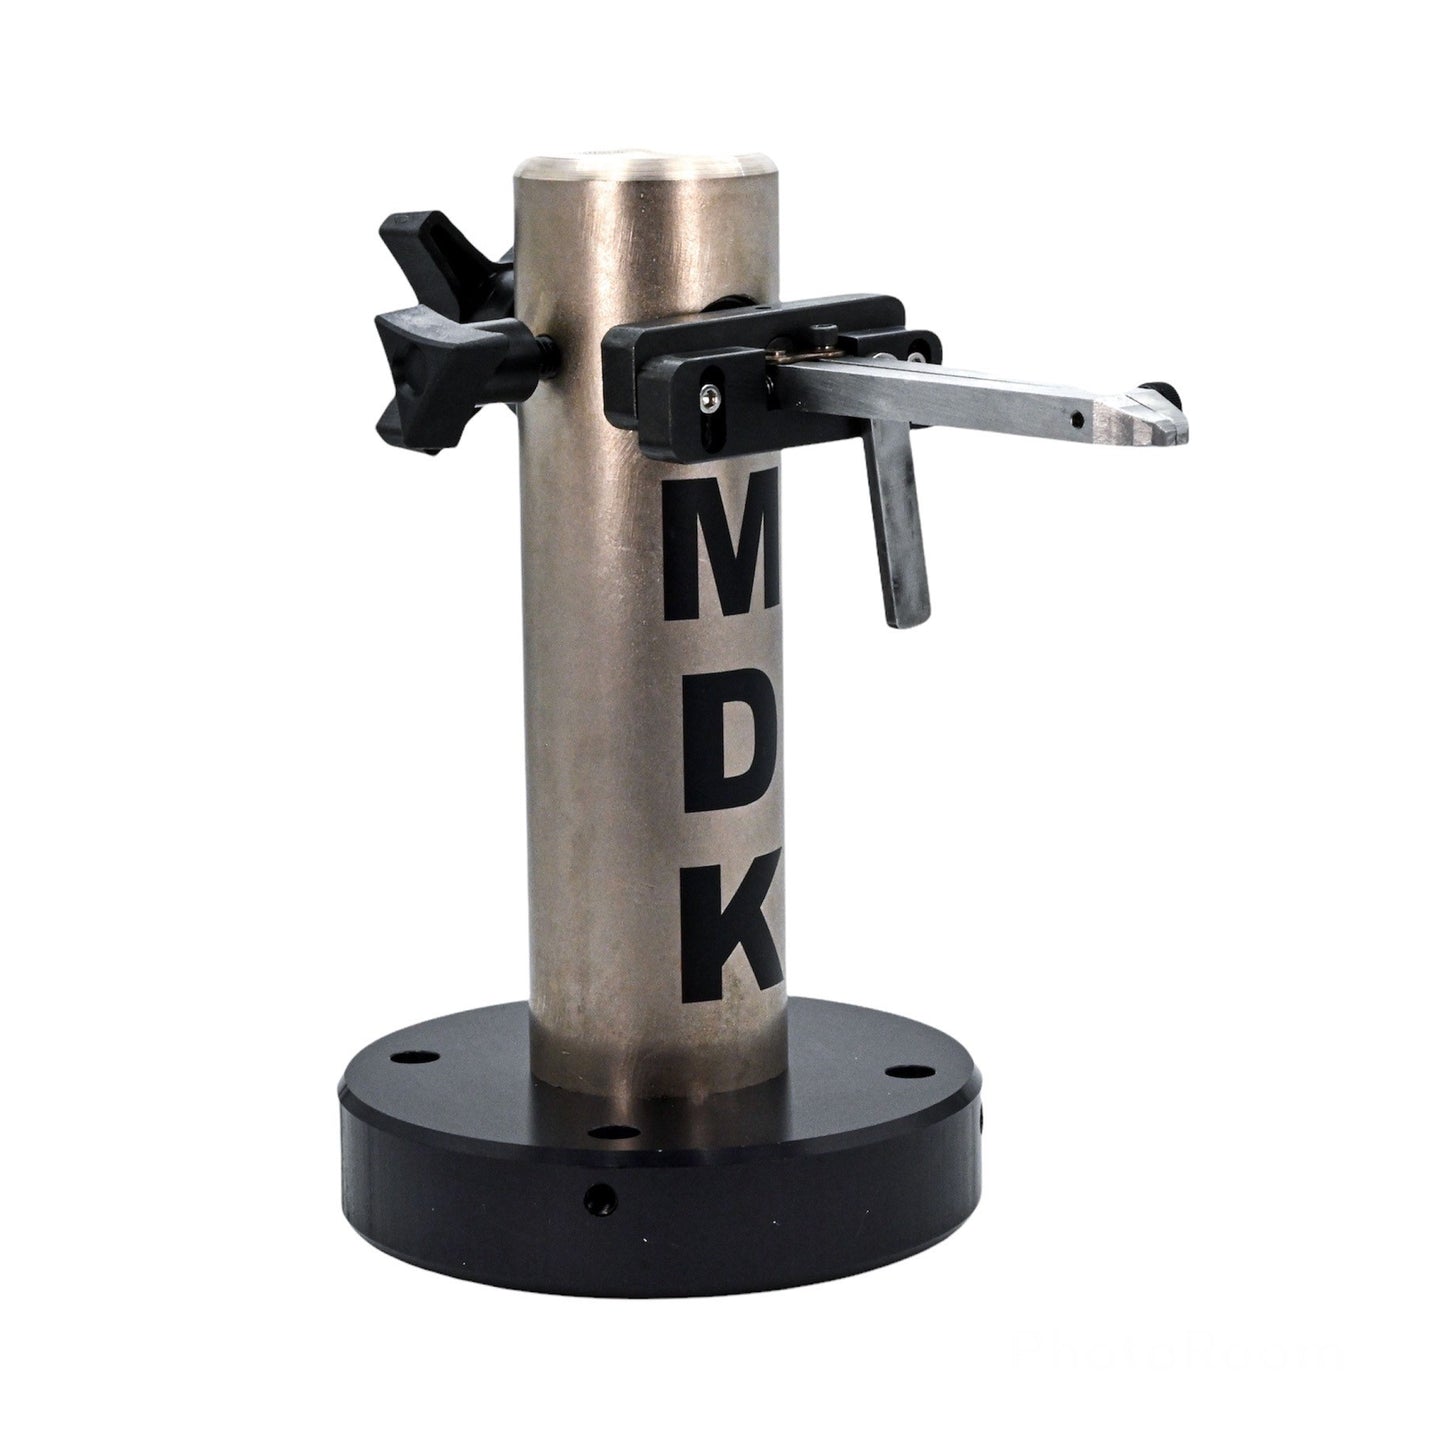 THE MDK FLY VISE